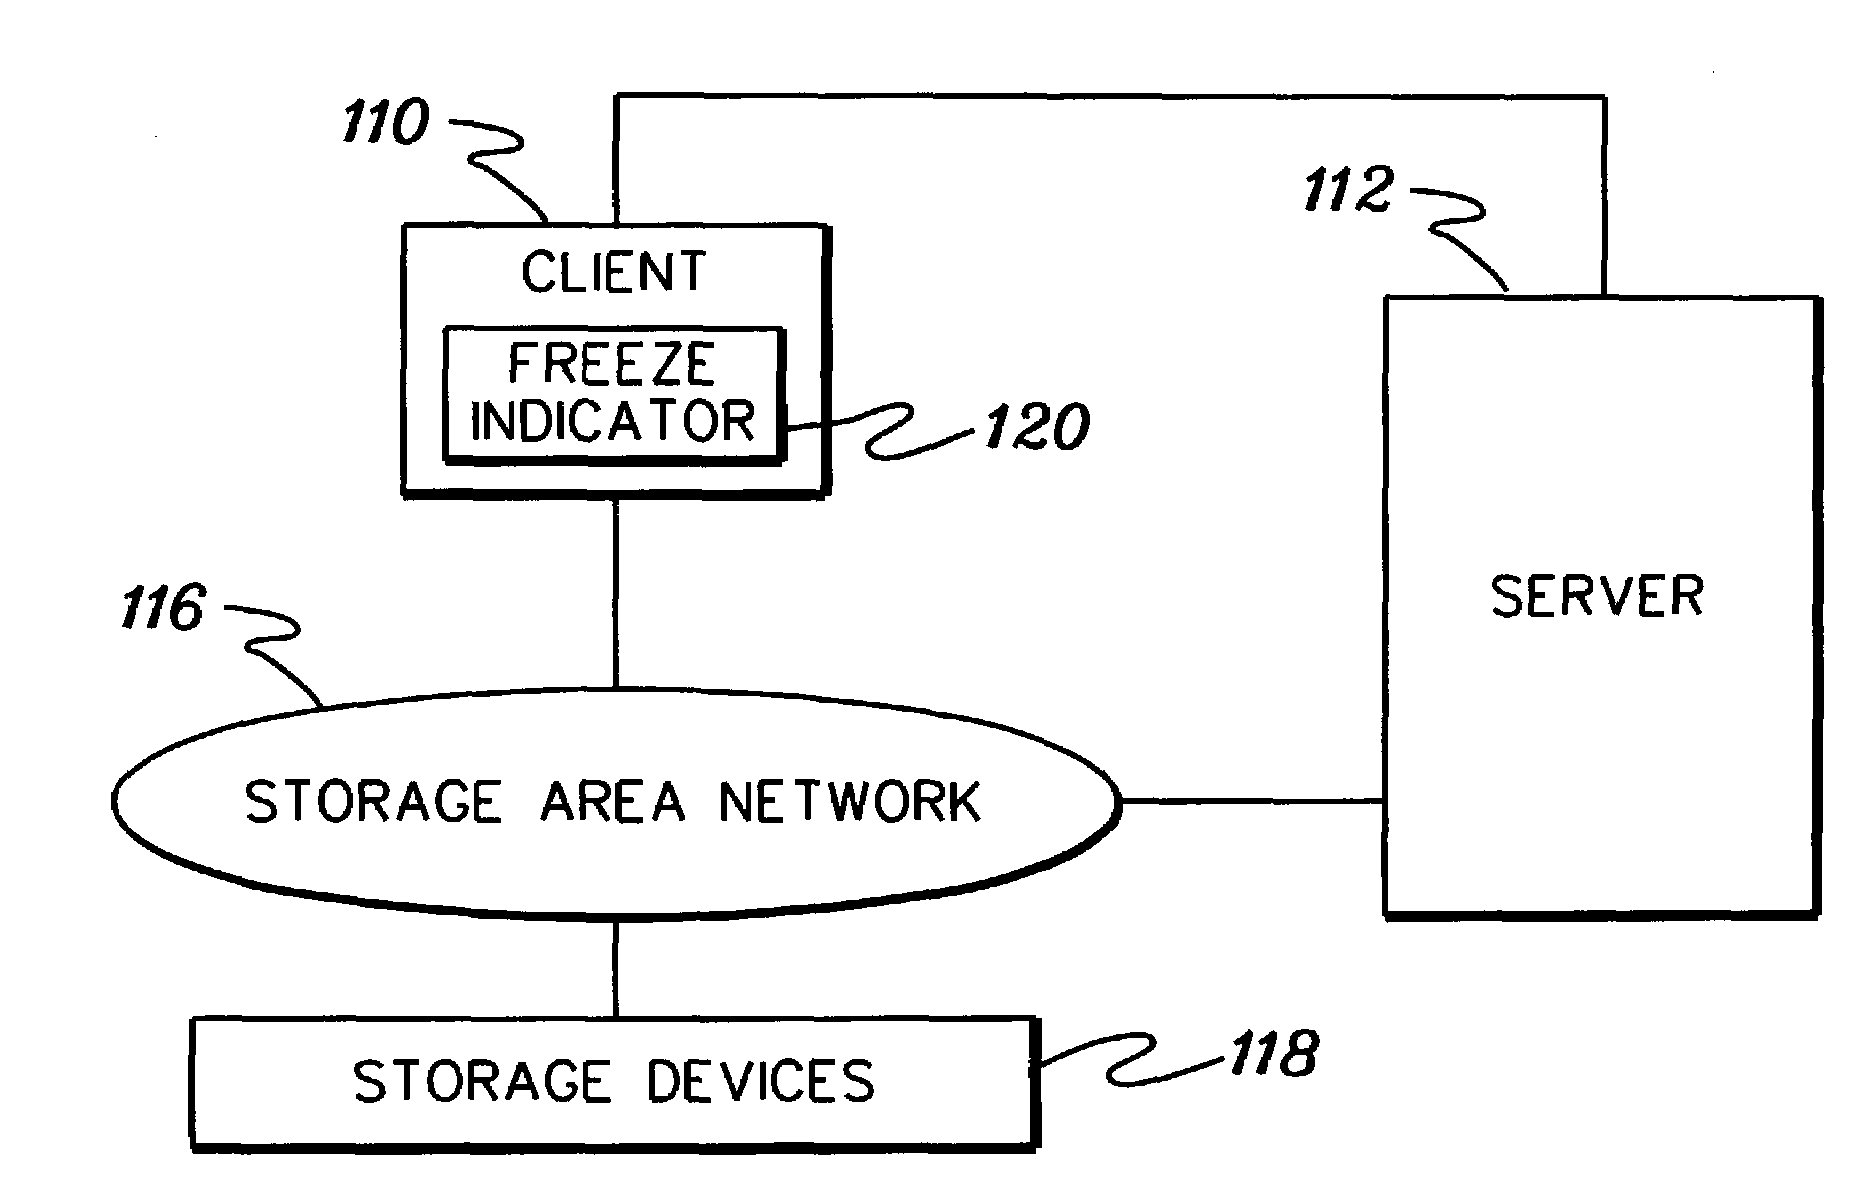 Automatically freezing functionality of a computing entity responsive to an error